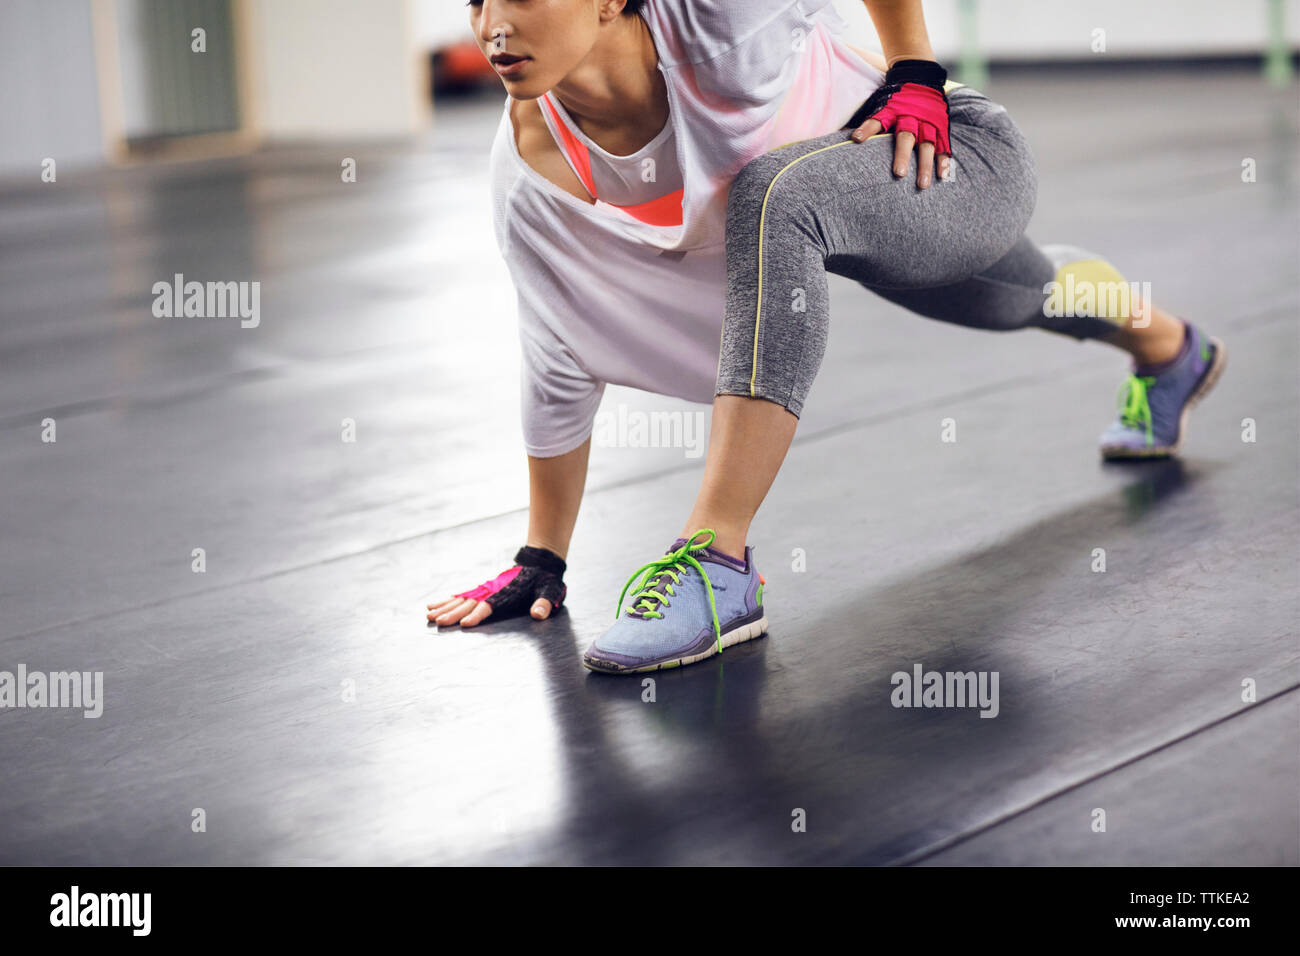 Low section of female athlete exercising in health club Stock Photo